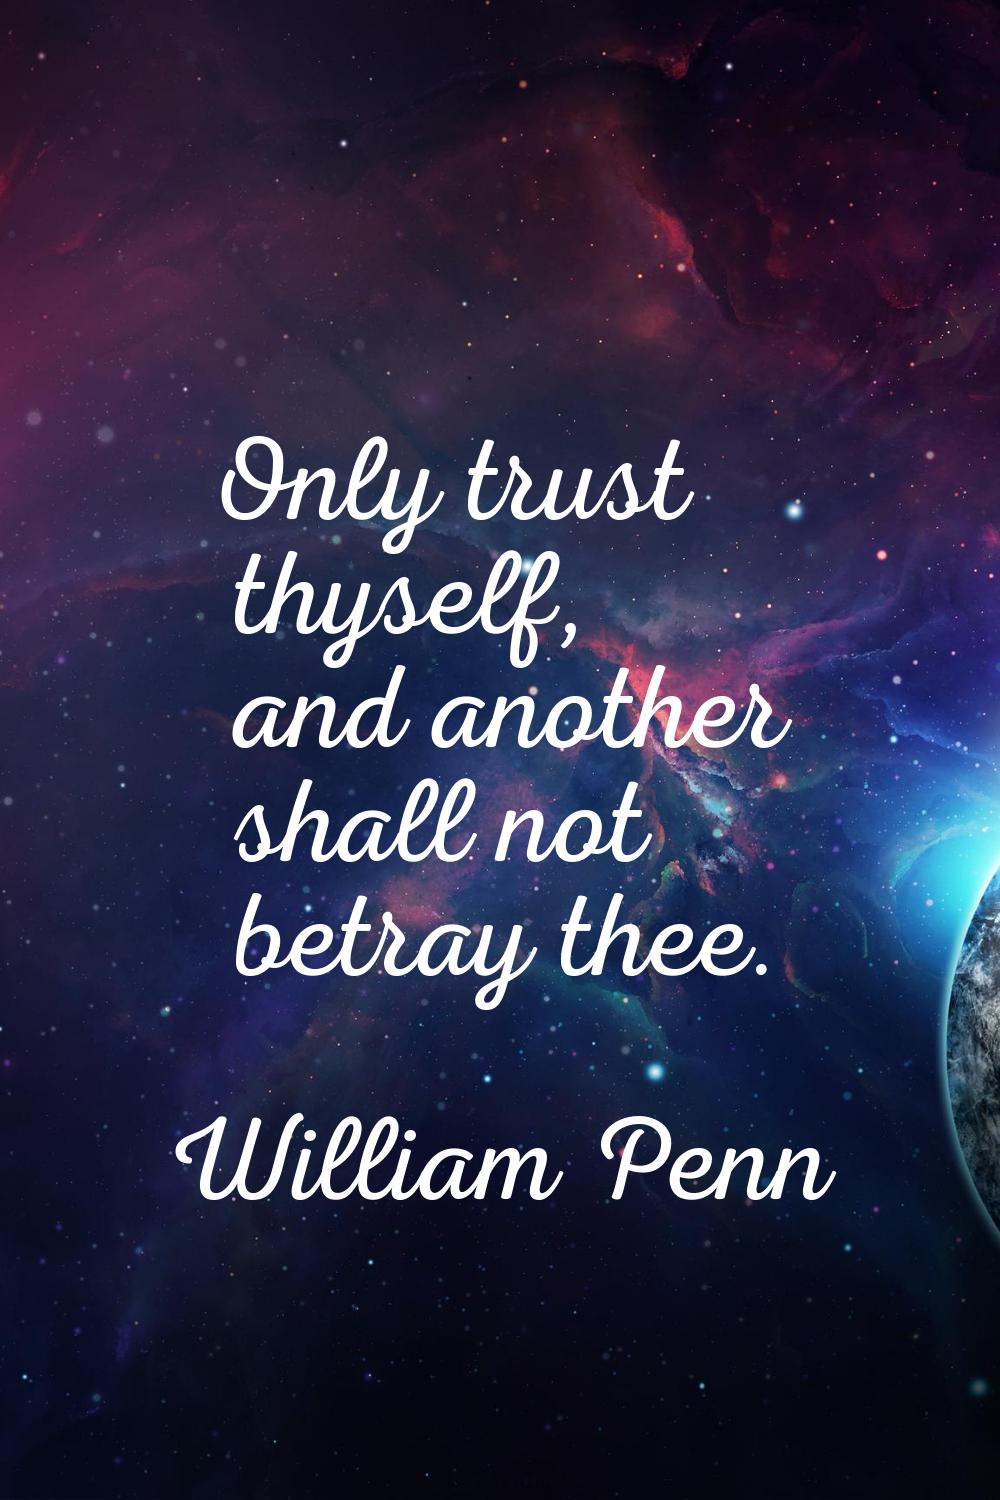 Only trust thyself, and another shall not betray thee.